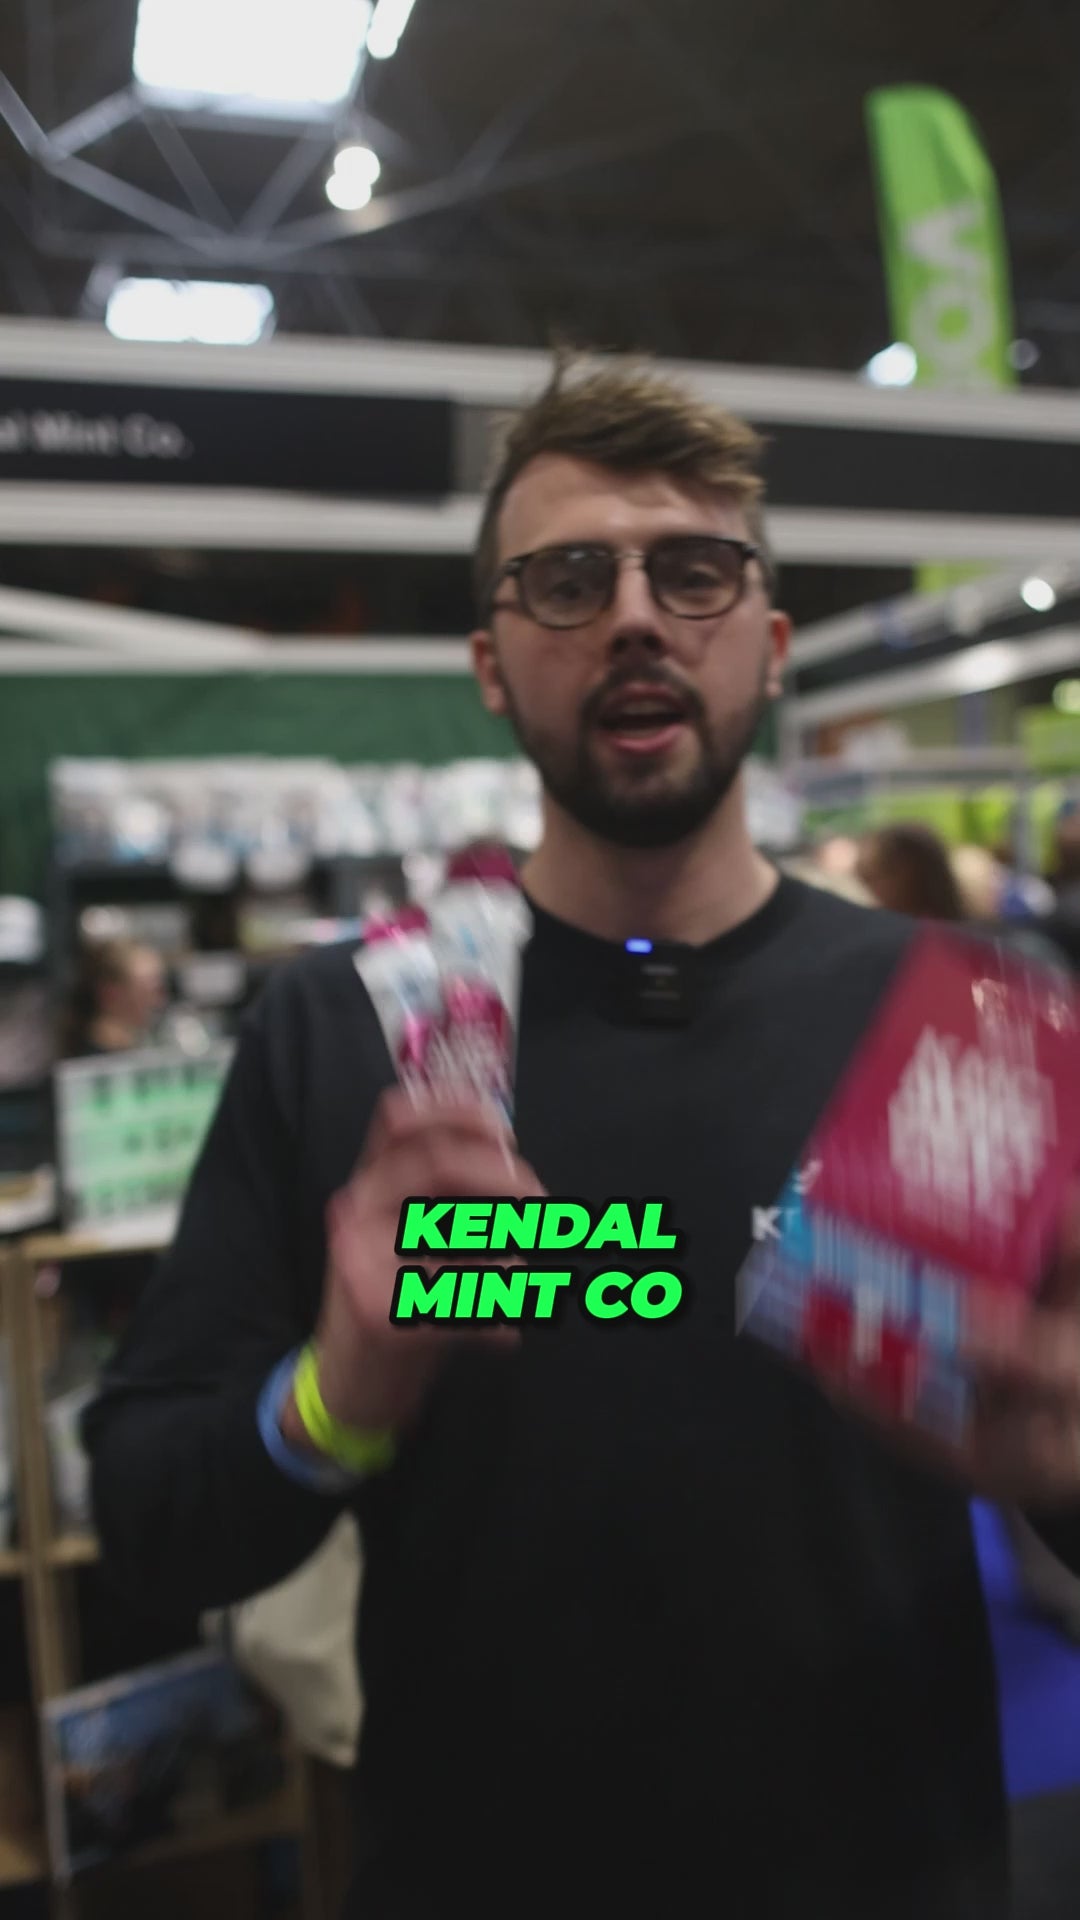 Video laden: Kendal Mint Co Energy Gels - What are they?  Energy gels provide a simple way to fuel with carbohydrates during exercise.  Packed with:  27g of Instant and long-lasting carbs, 4 Essential electrolytes to maximise hydration, 4 B Vitamins  They’re also:  Easy on the stomach, Vegan, Gluten-Free